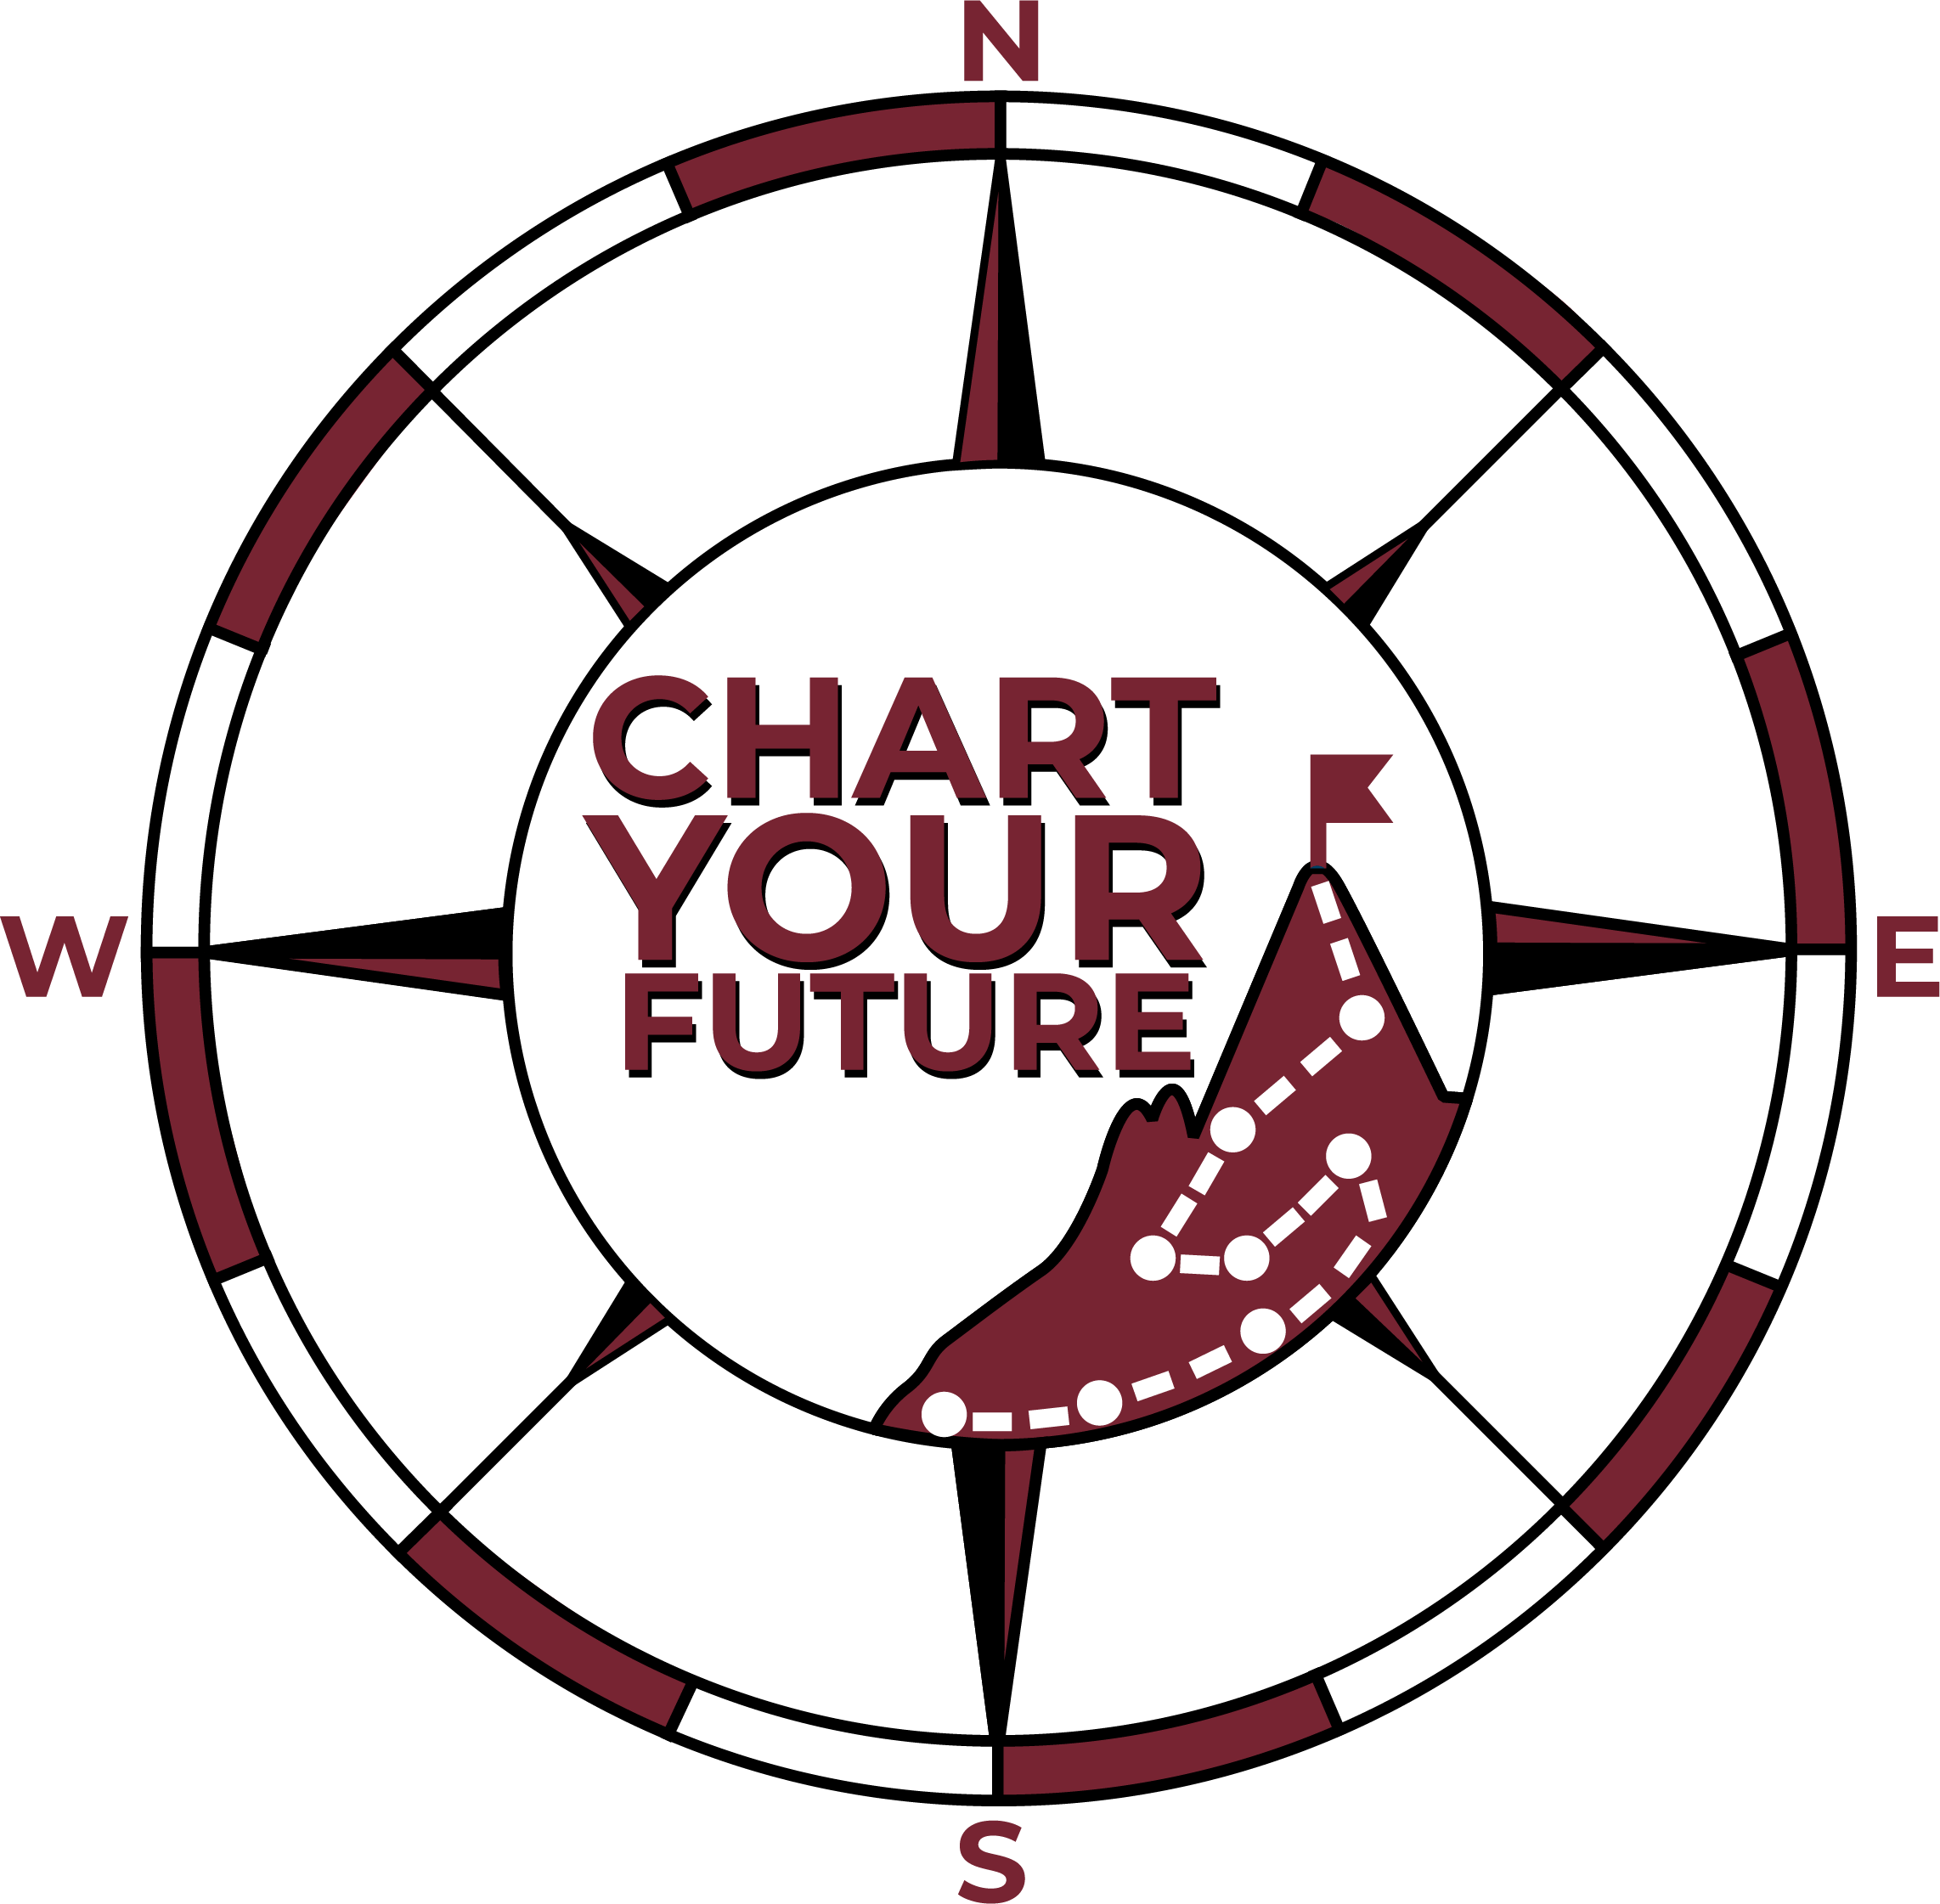 District 60 Annual Conference Logo in True Maroon - A circular compass with Chart Your Future printed at the center and a trekking mountain range with a flag on top